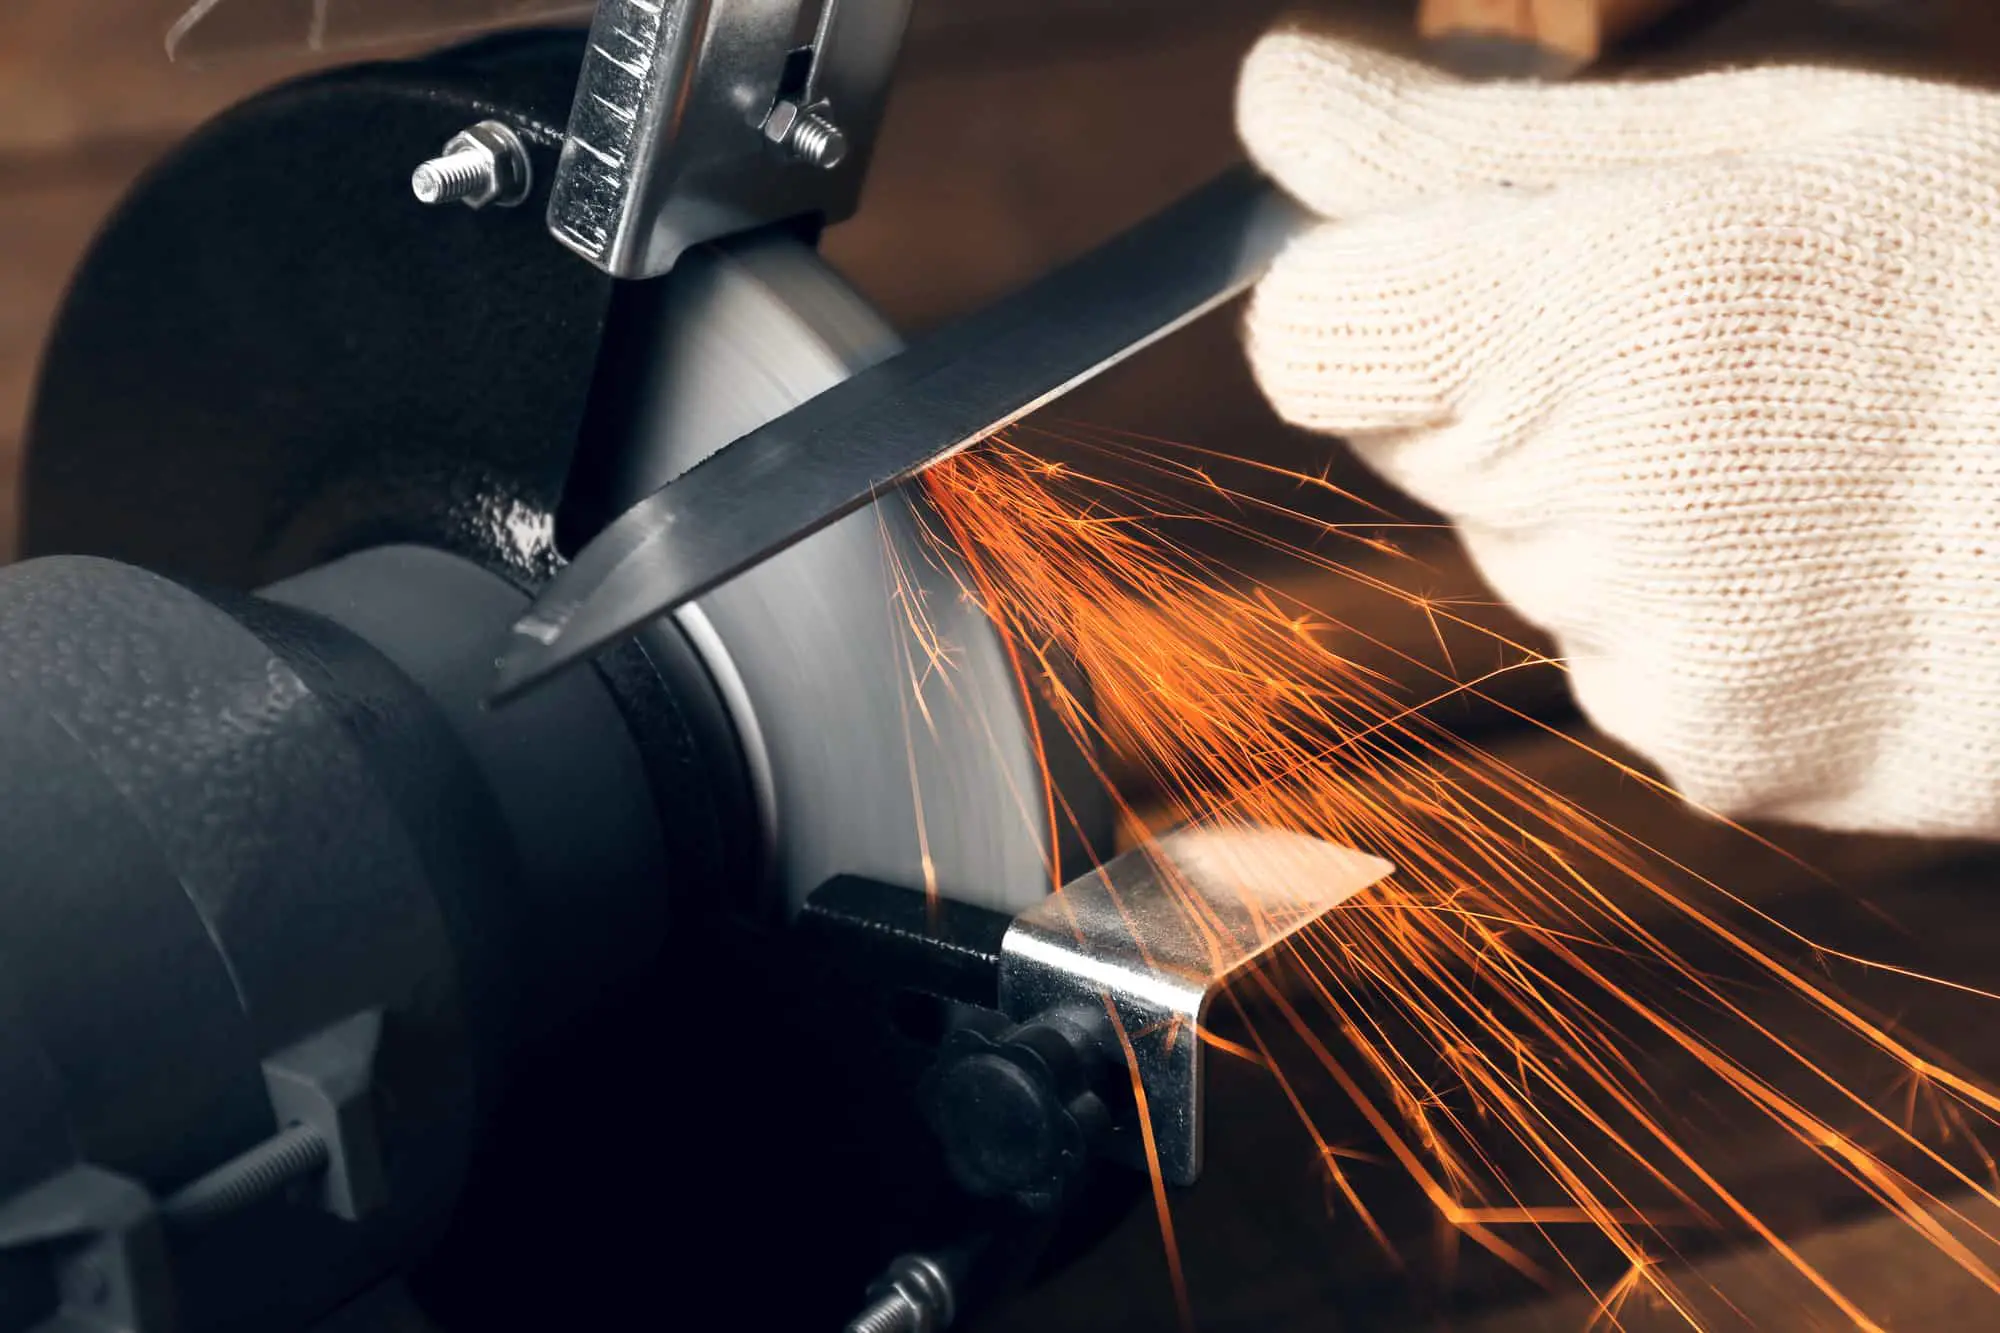 Can You Sharpen A Knife With A Bench Grinder?